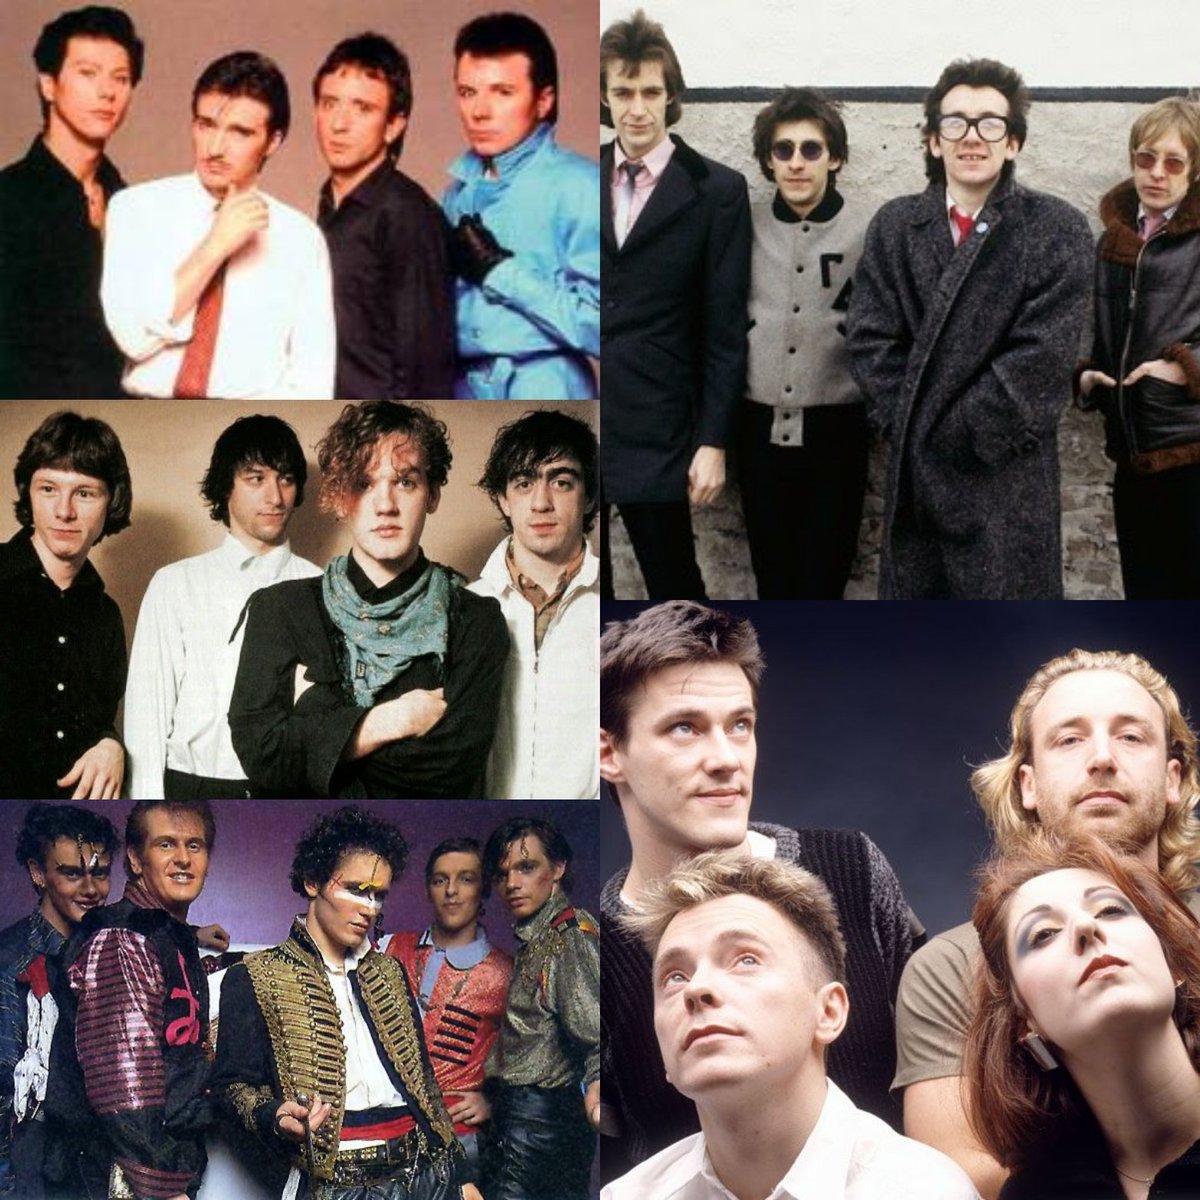 Hey #moefos it's Saturday, so who's ready for 2 hours of awesome #80smusic including #ultravox #REM #adamAndTheAnts #elvisCostelloandTheAttractions #newOrder & so much more. The fun starts at 9 pm on 91.3 @kbcs - hope to see you there.